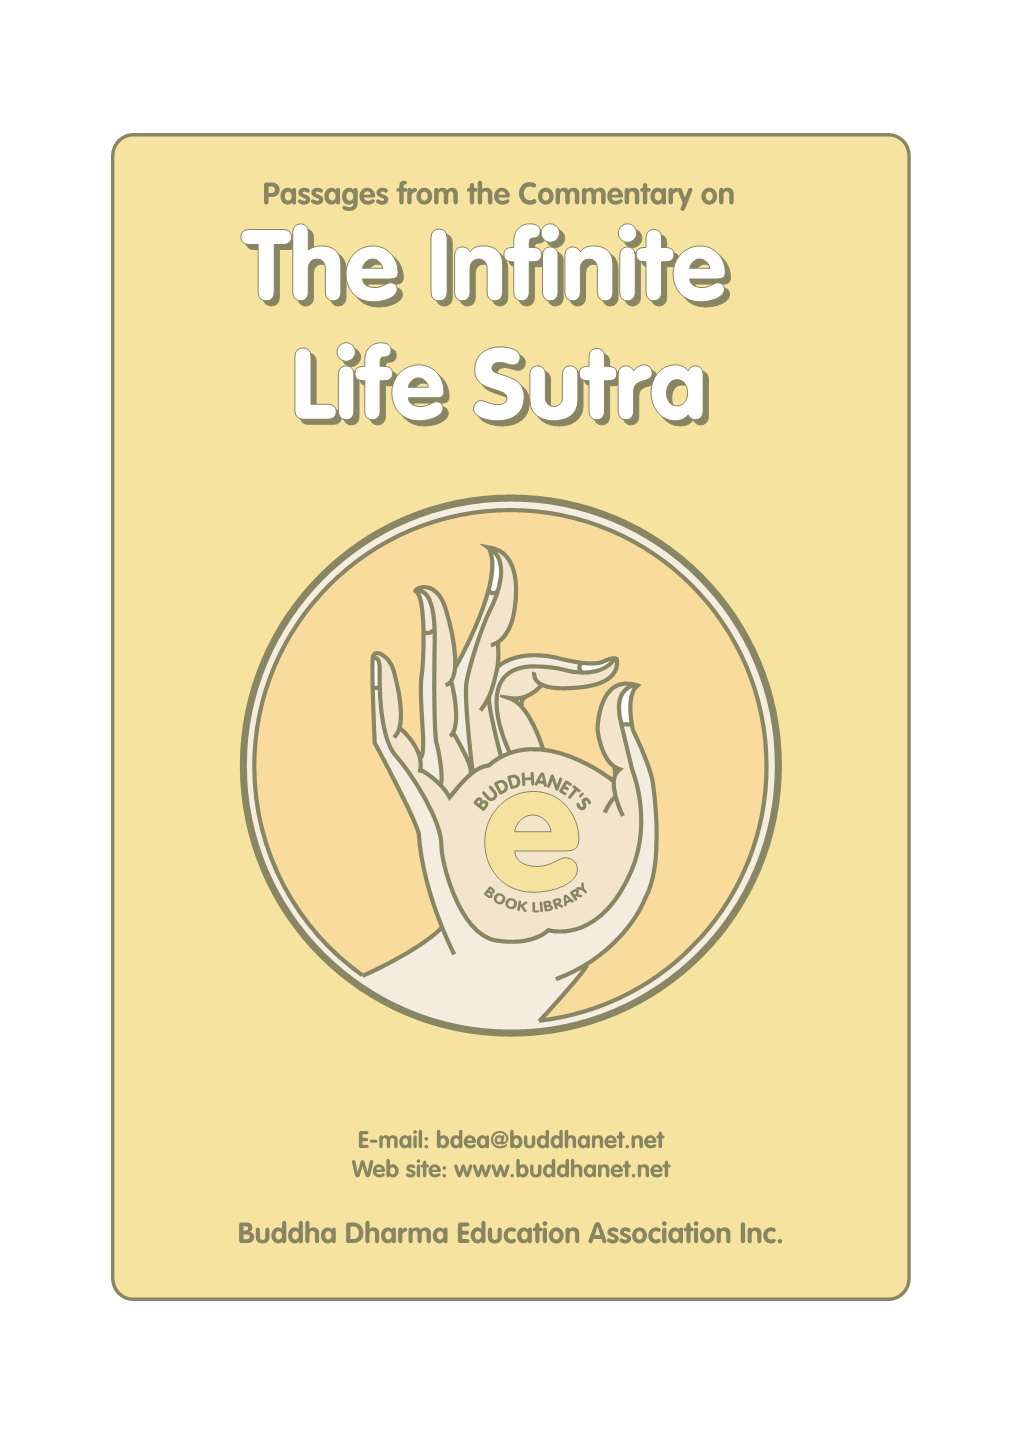 Passages from the Commentary on Thethe Infiniteinfinite Lifelife Sutrasutra